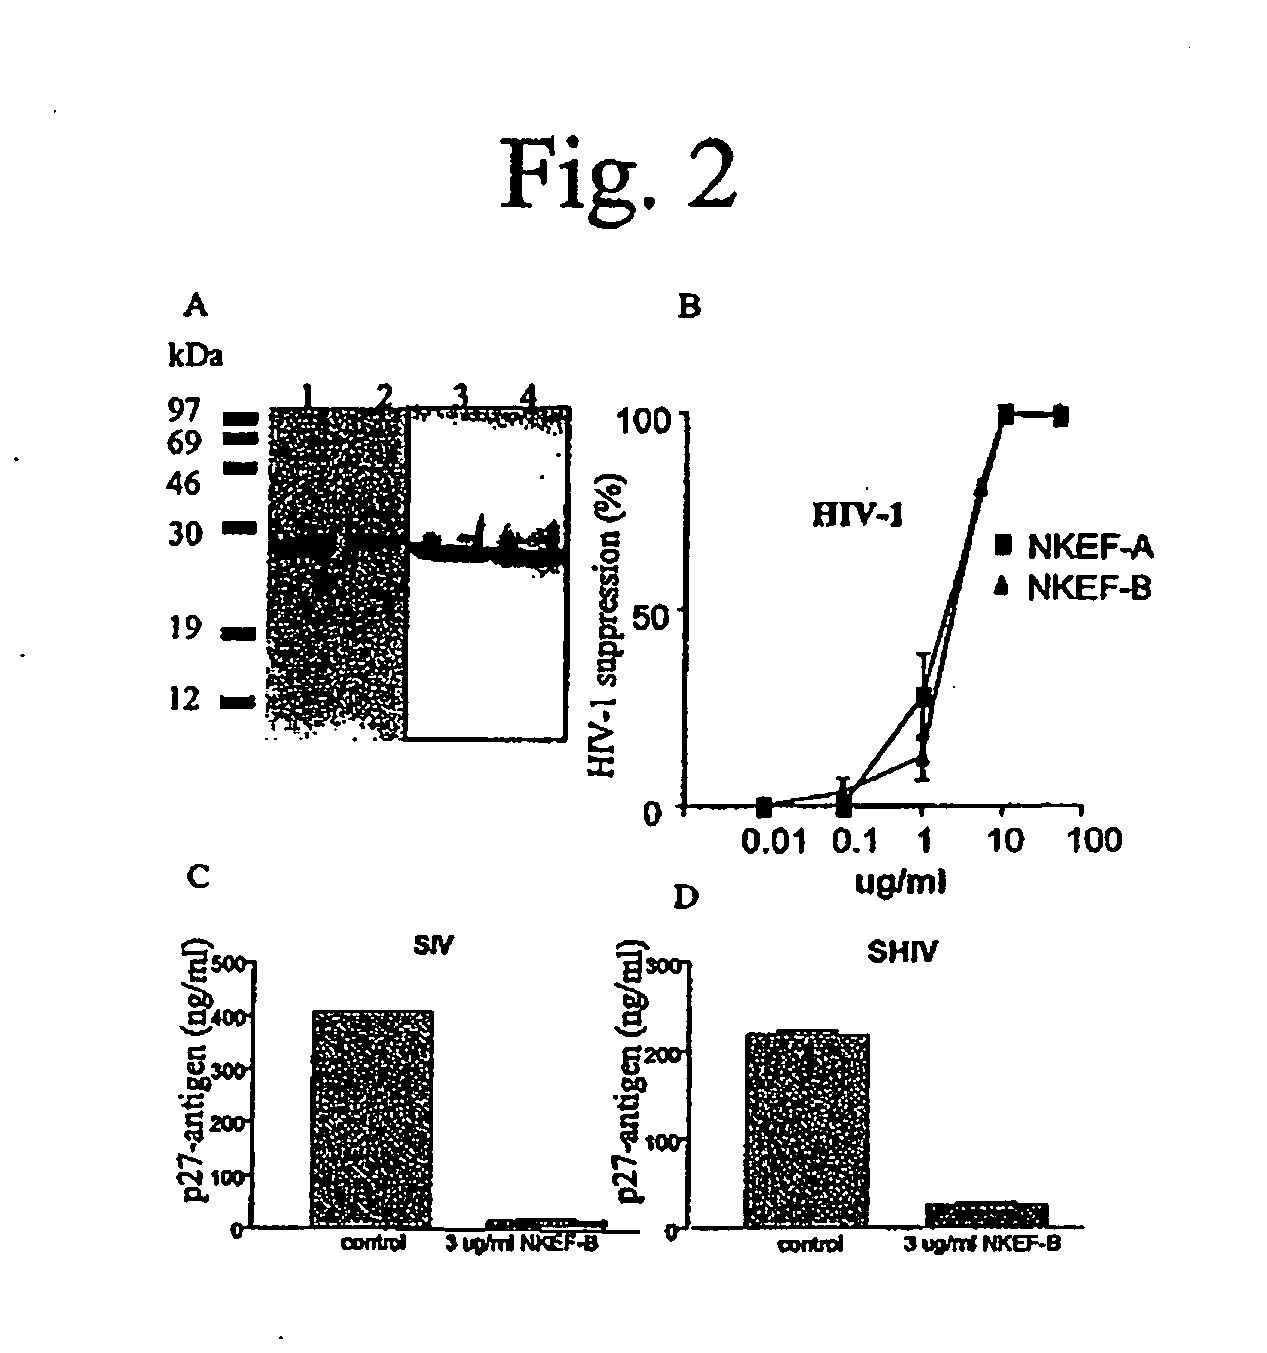 Peroxiredoxin drugs for treatment of hiv-1 infection and methods of use thereof